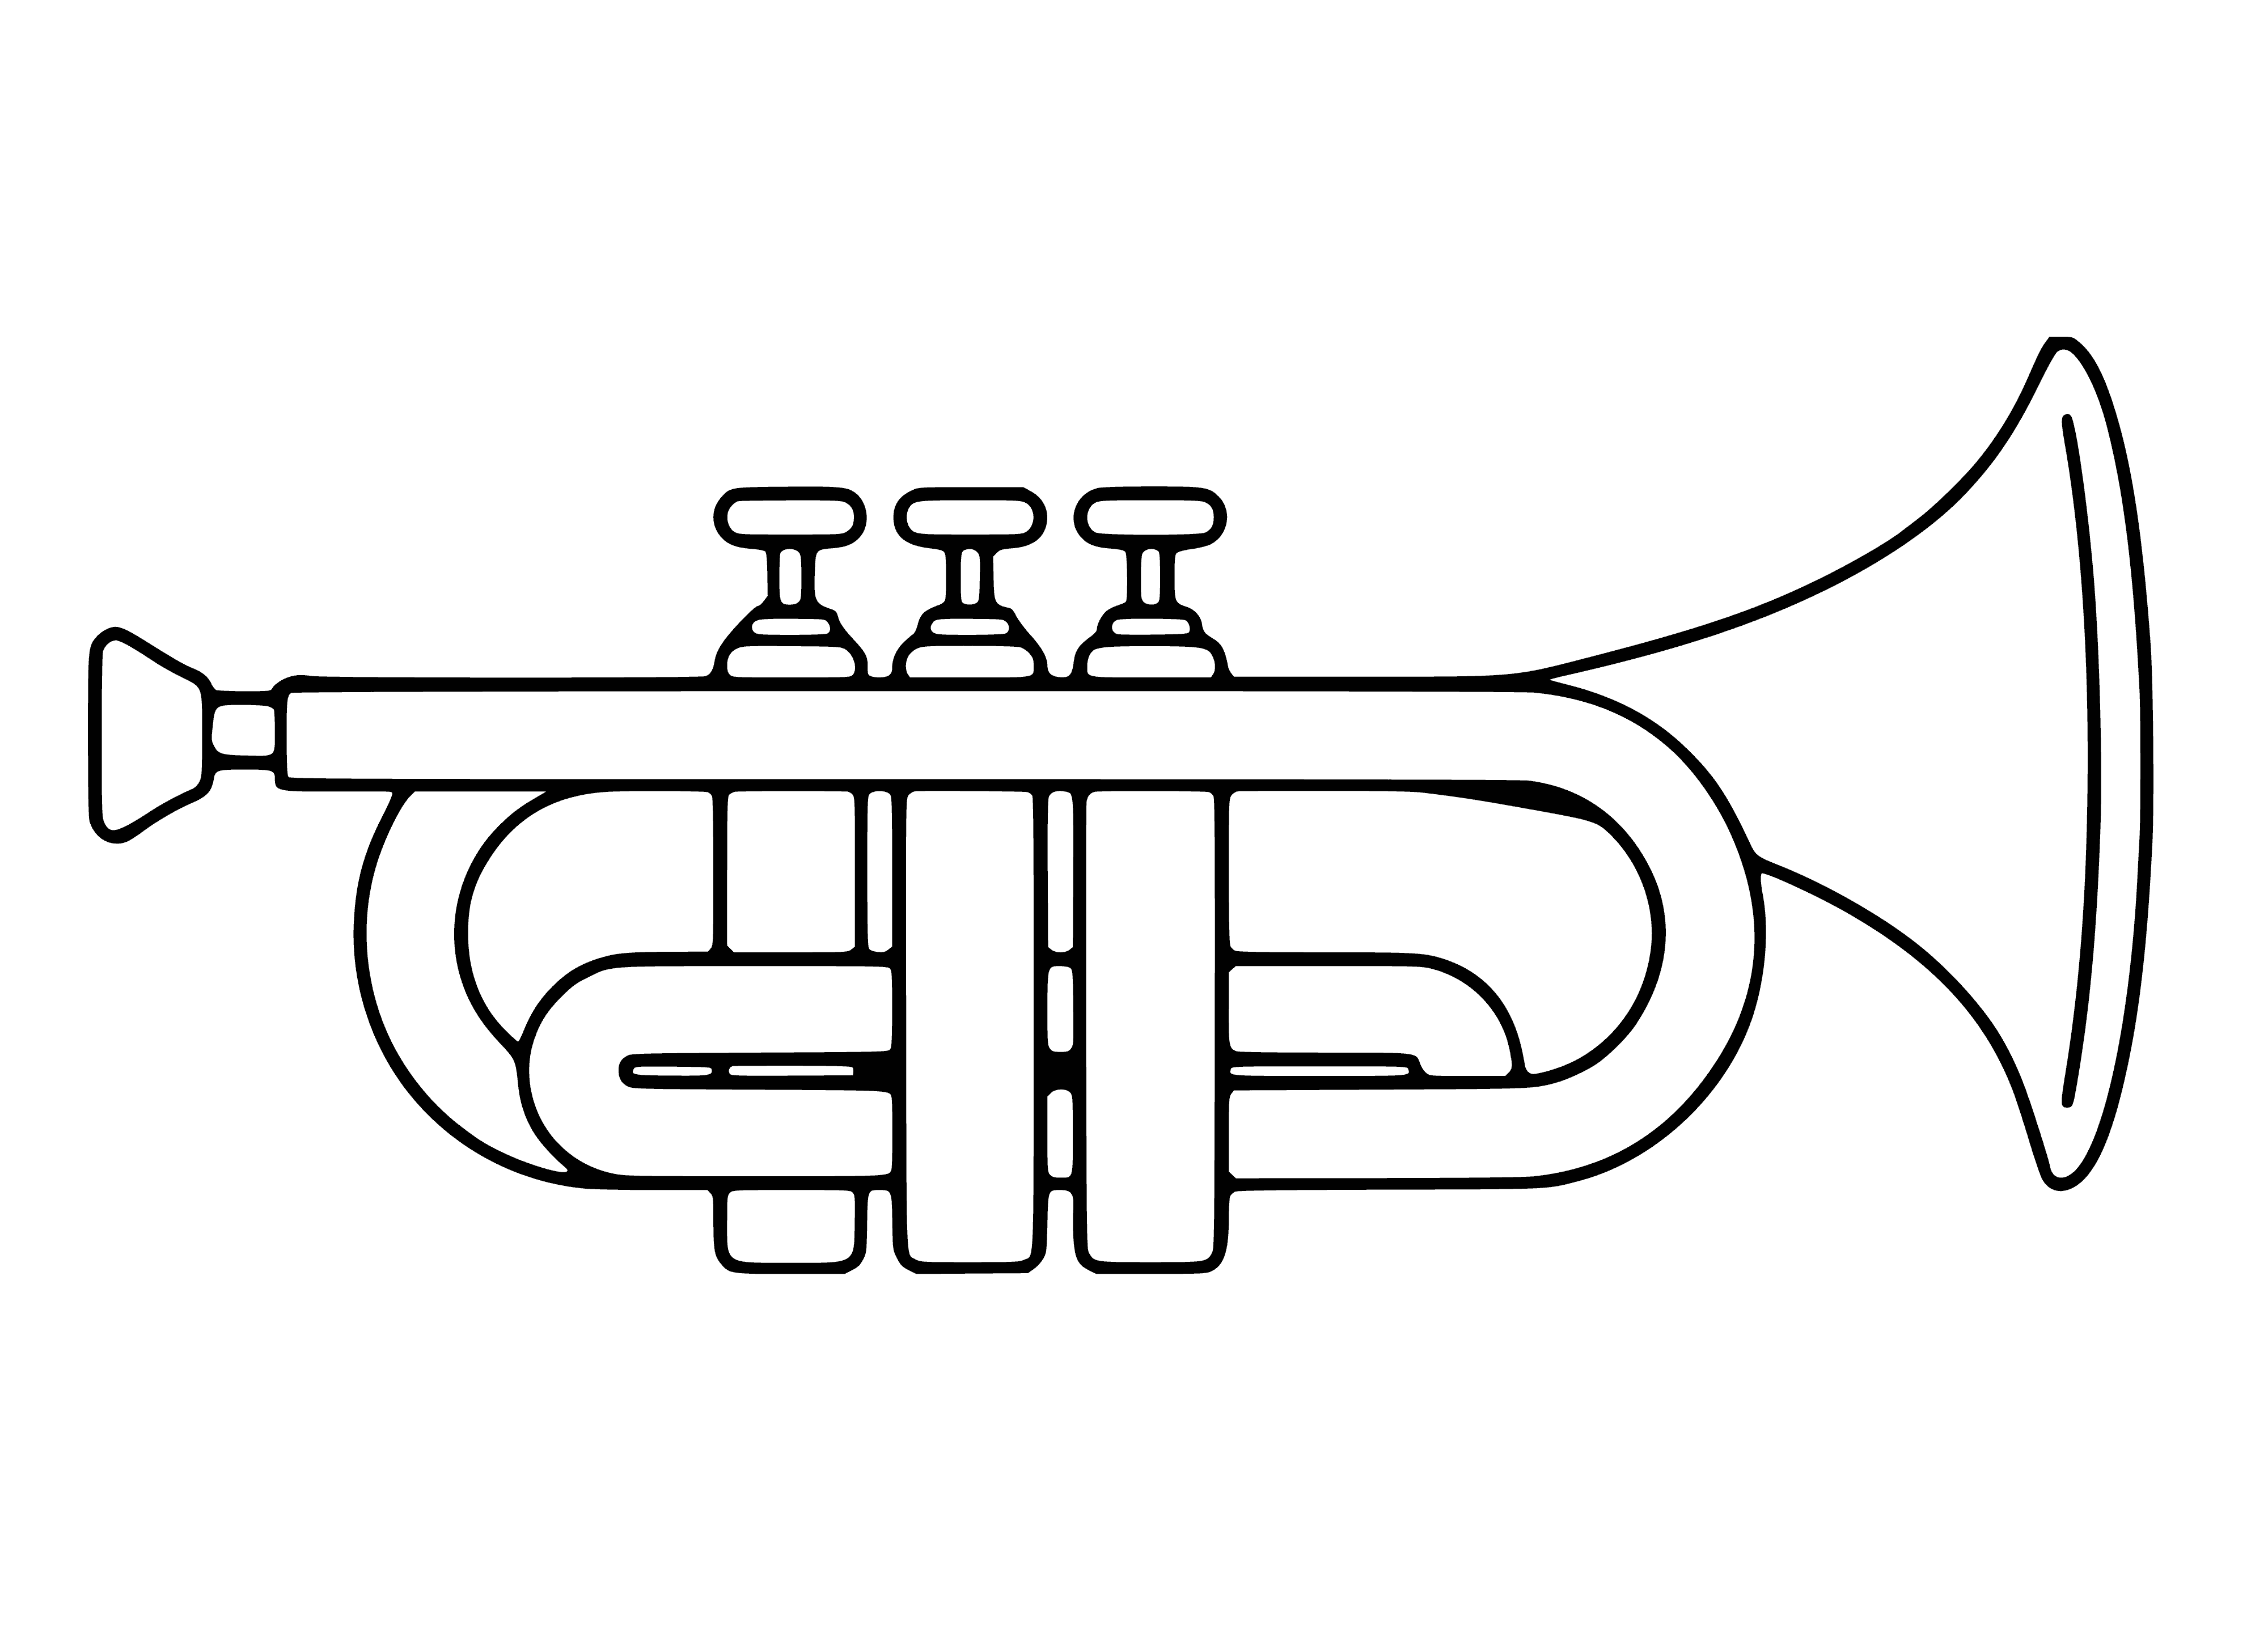 coloring page: Wind instrument made of tube with a hole and small opening; blowing into it makes a sound.